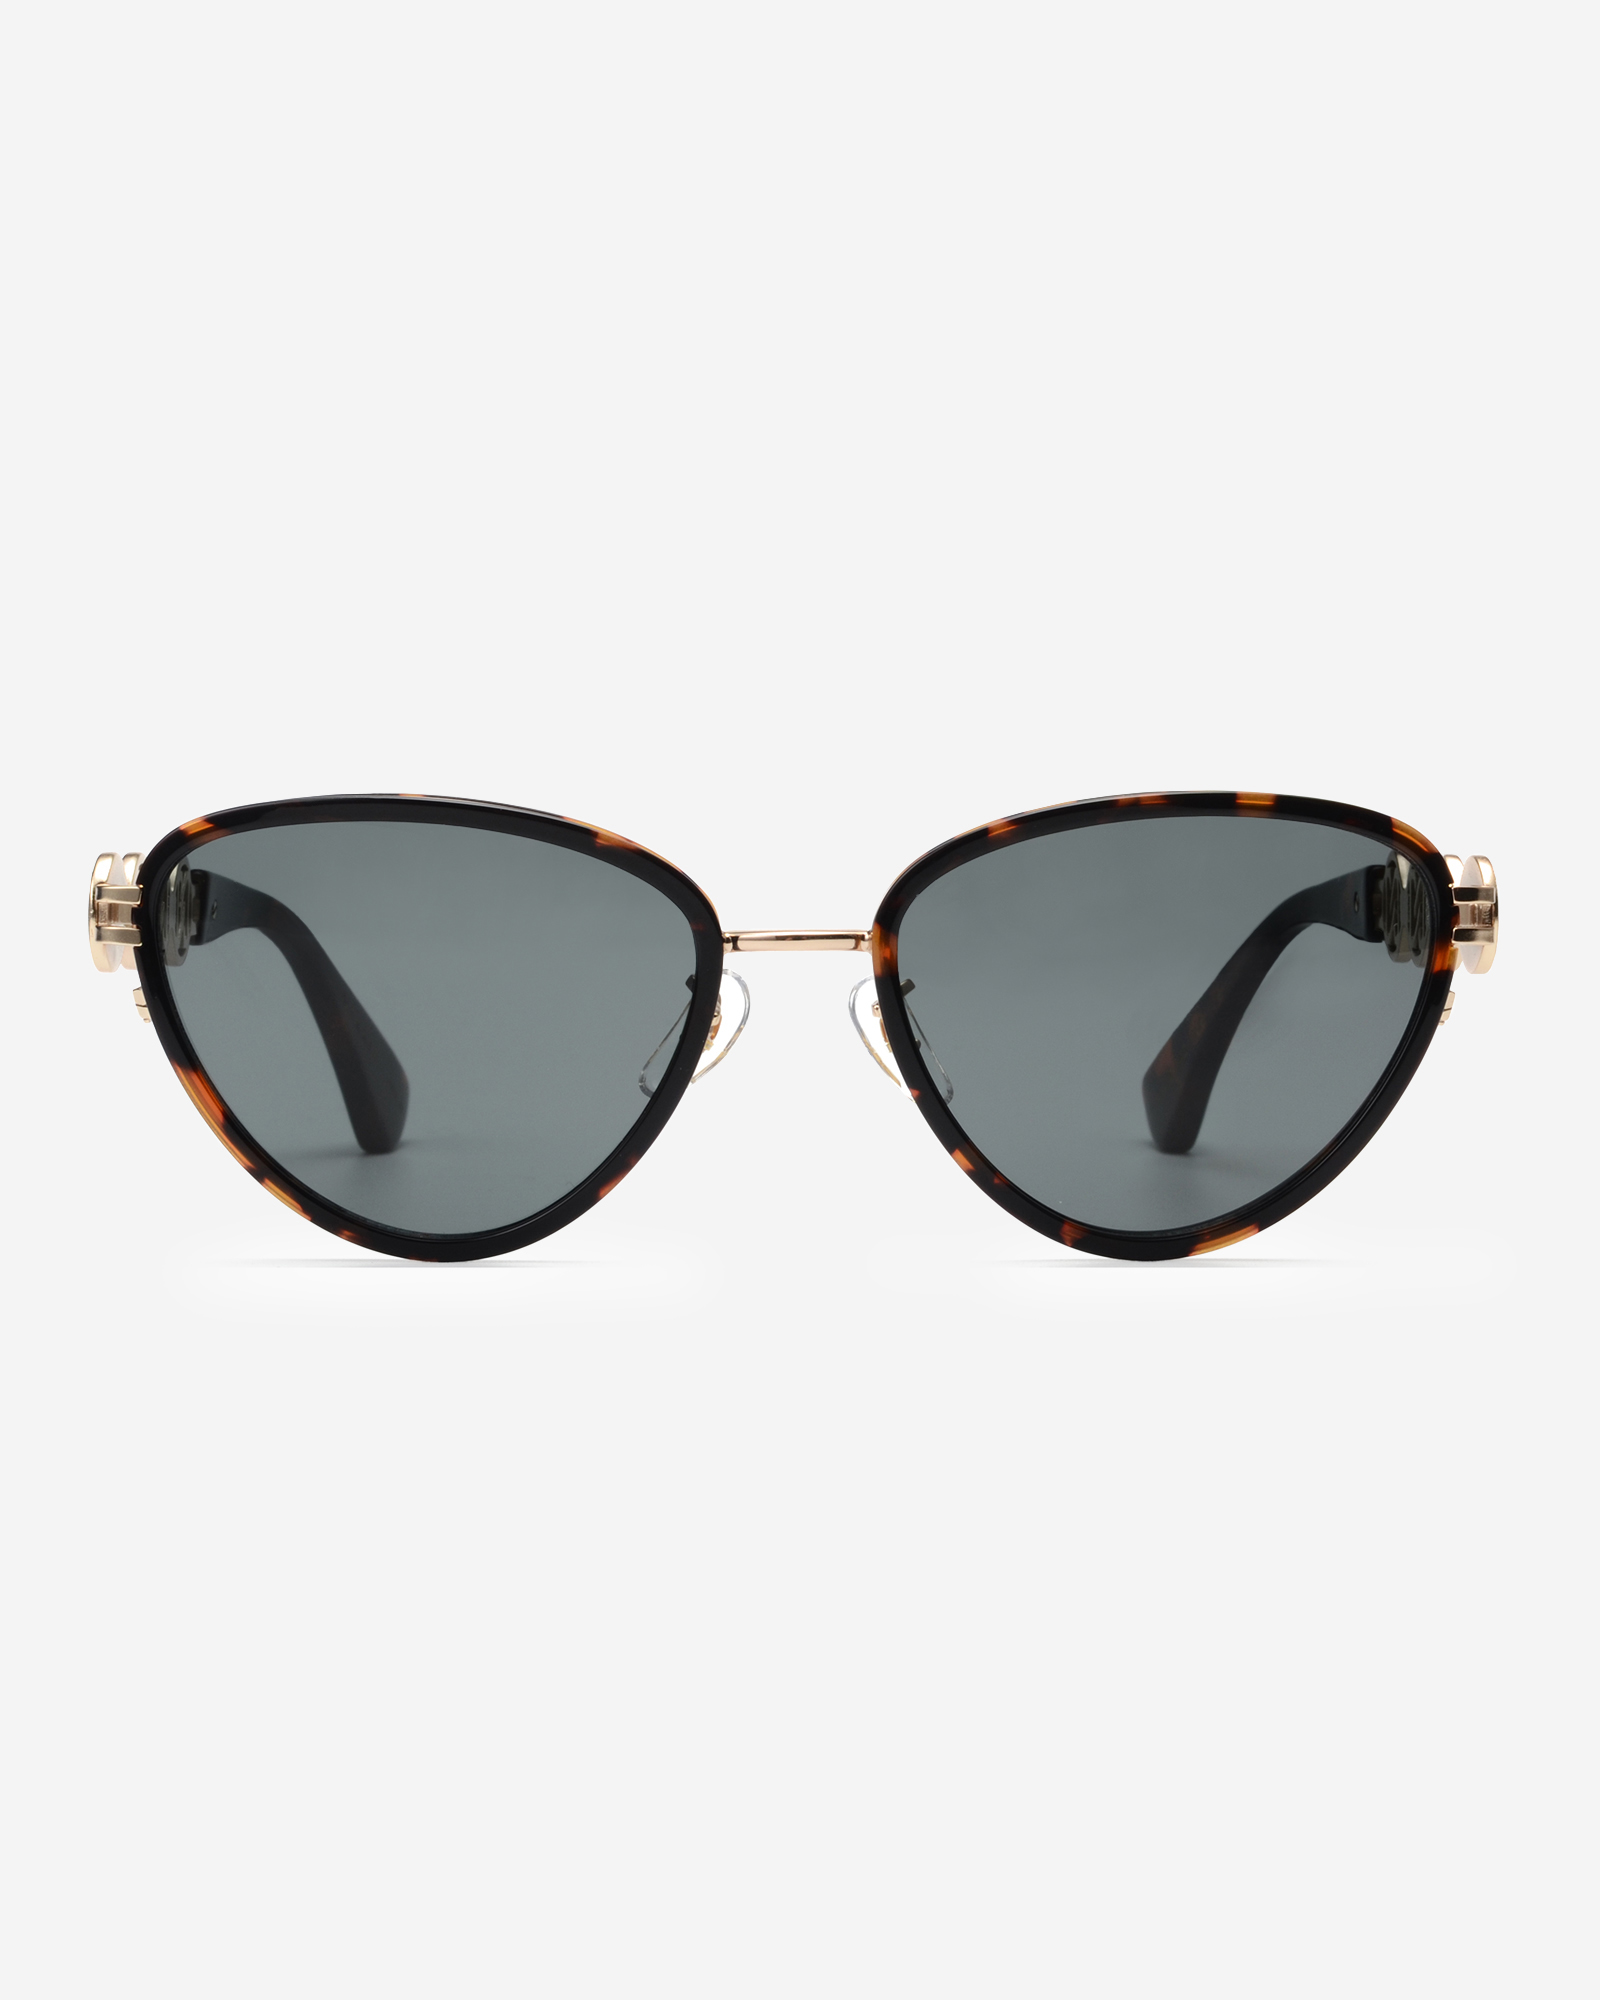 butterfly-shaped sunglasses with golden details